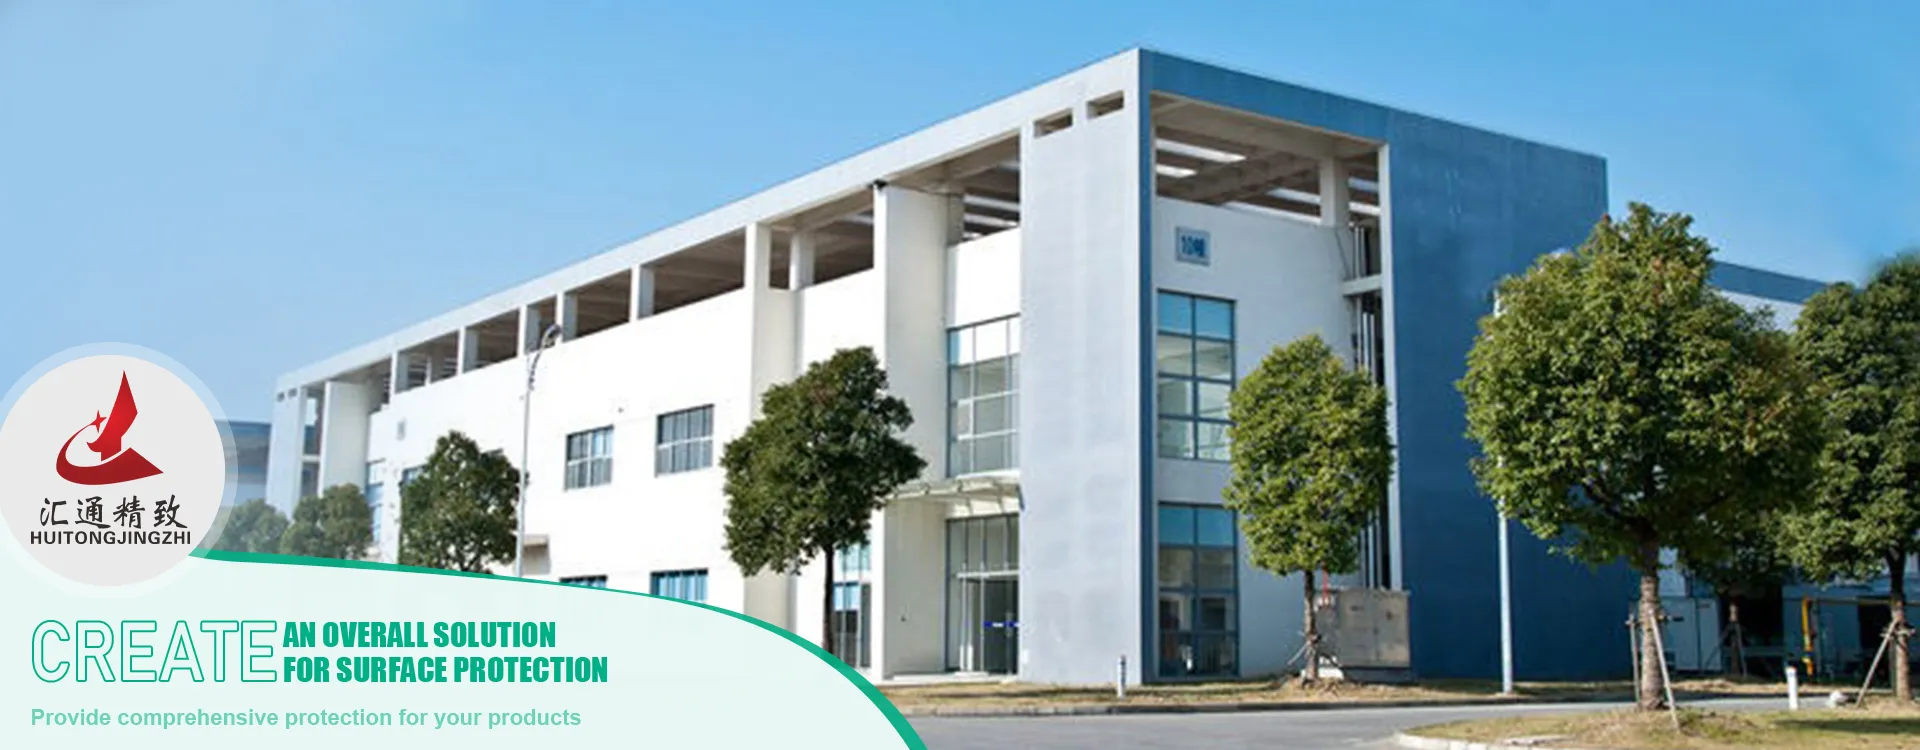 Langfang Huitong Plastic Packaging Products Co., Ltd.